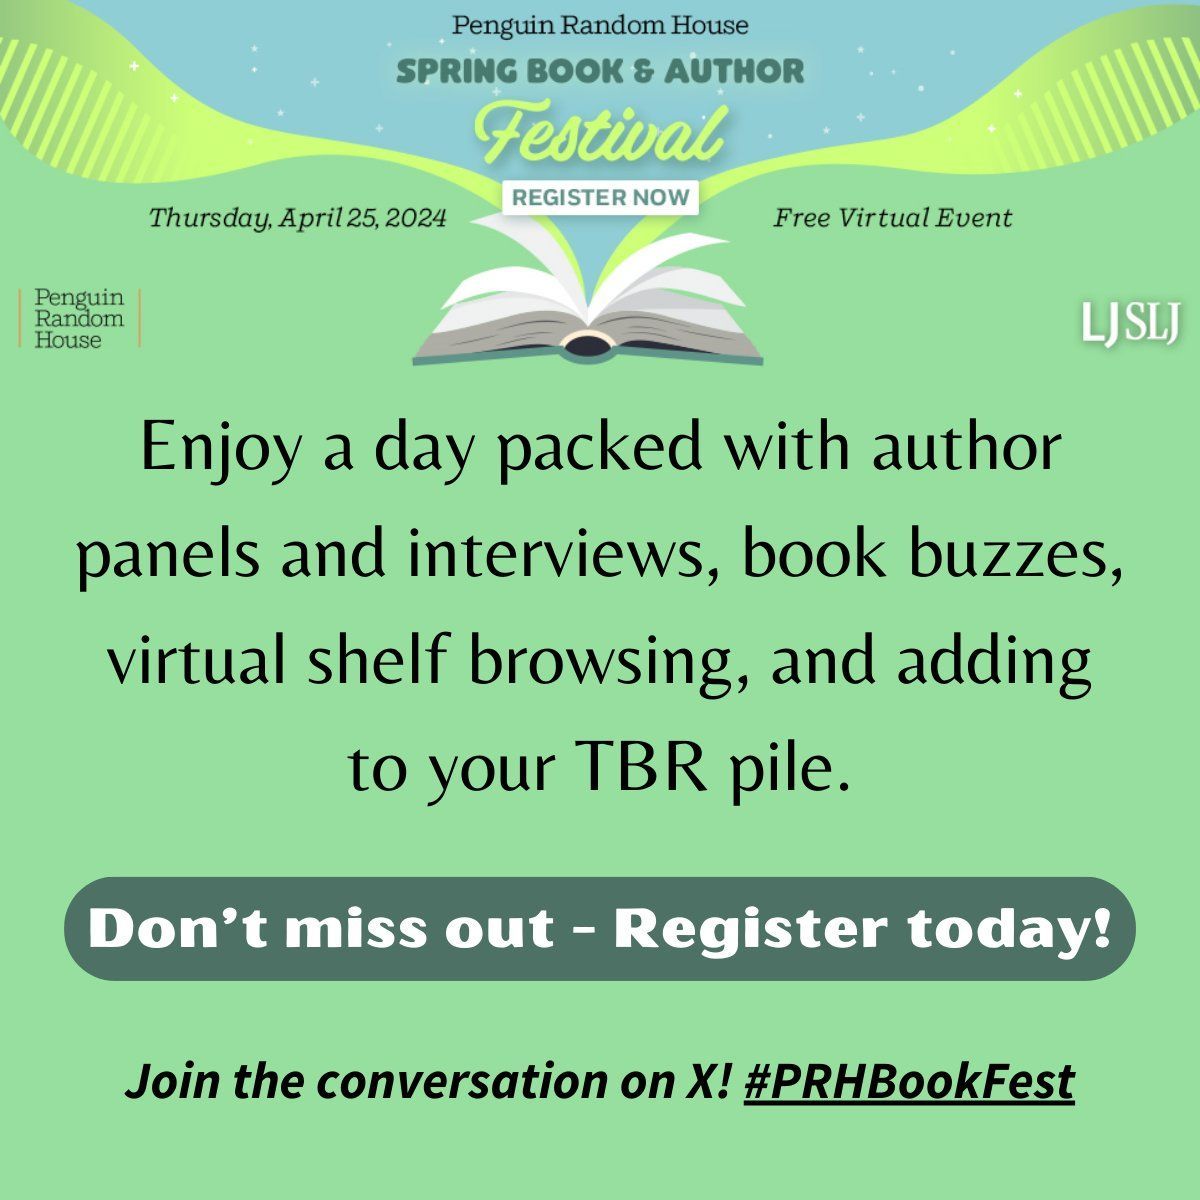 I'm excited to appear at the @PenguinClass, @LibraryJournal, & @sljournal Spring 2024 Virtual #PRHBookFest! 🎉 This free event will have author panels, giveaways, & more. I'll be on a panel with Alison McGhee, @cooke_pan, & @cprwords! I hope you'll join: libraryjournal.com/event/prh-spri…